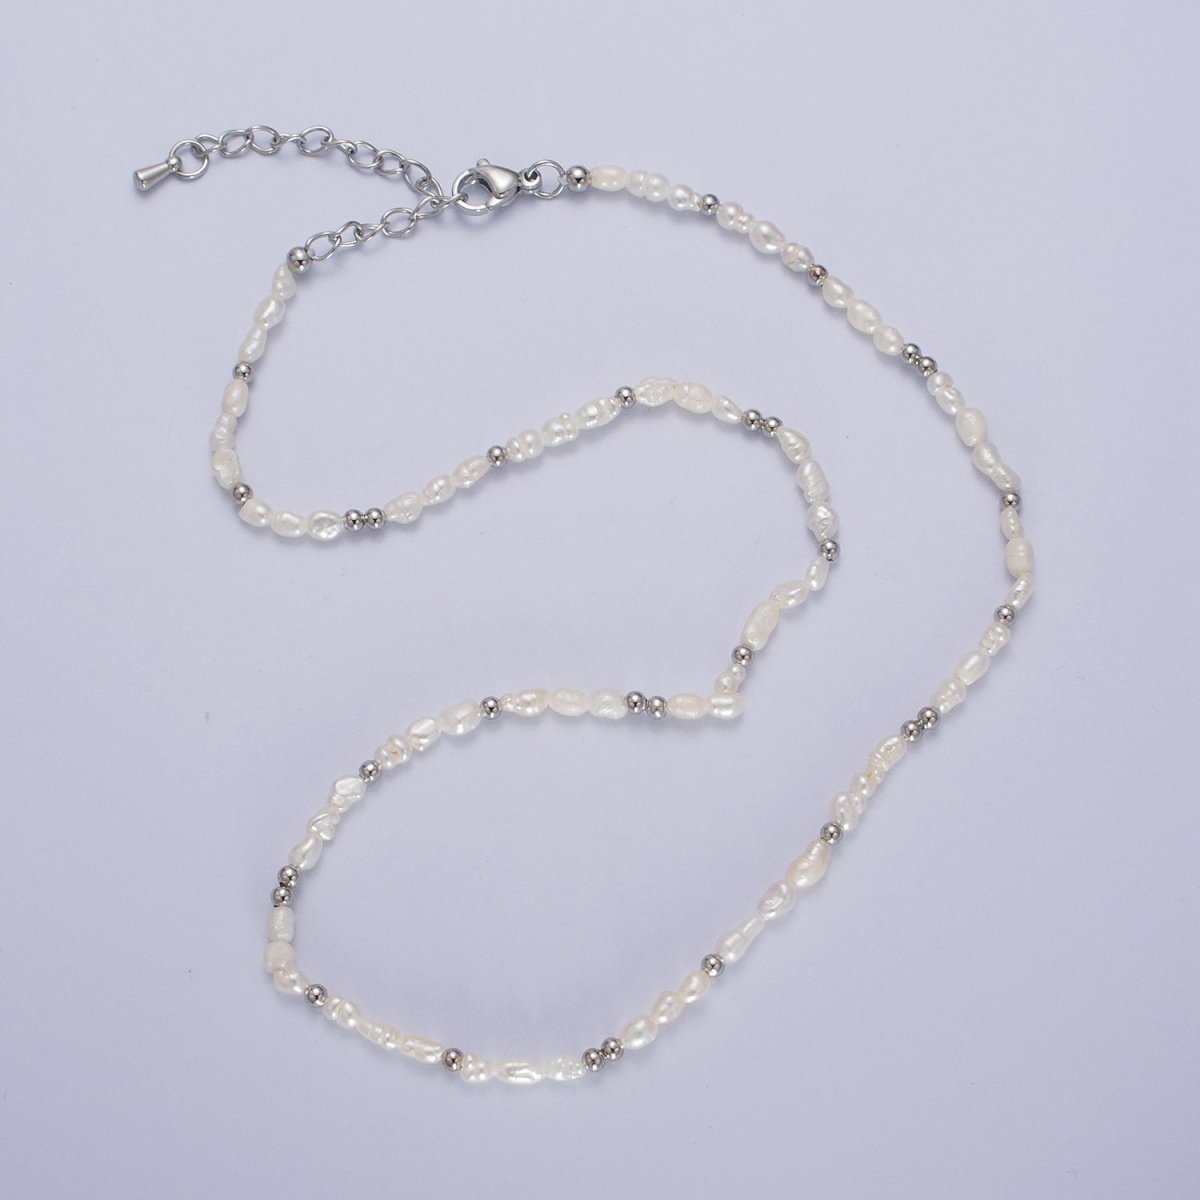 Dainty 3mm Baroque Freshwater Pearl White Gold Filled Silver Beads 15 Inch Choker Necklace | WA-1448 Clearance Pricing - DLUXCA